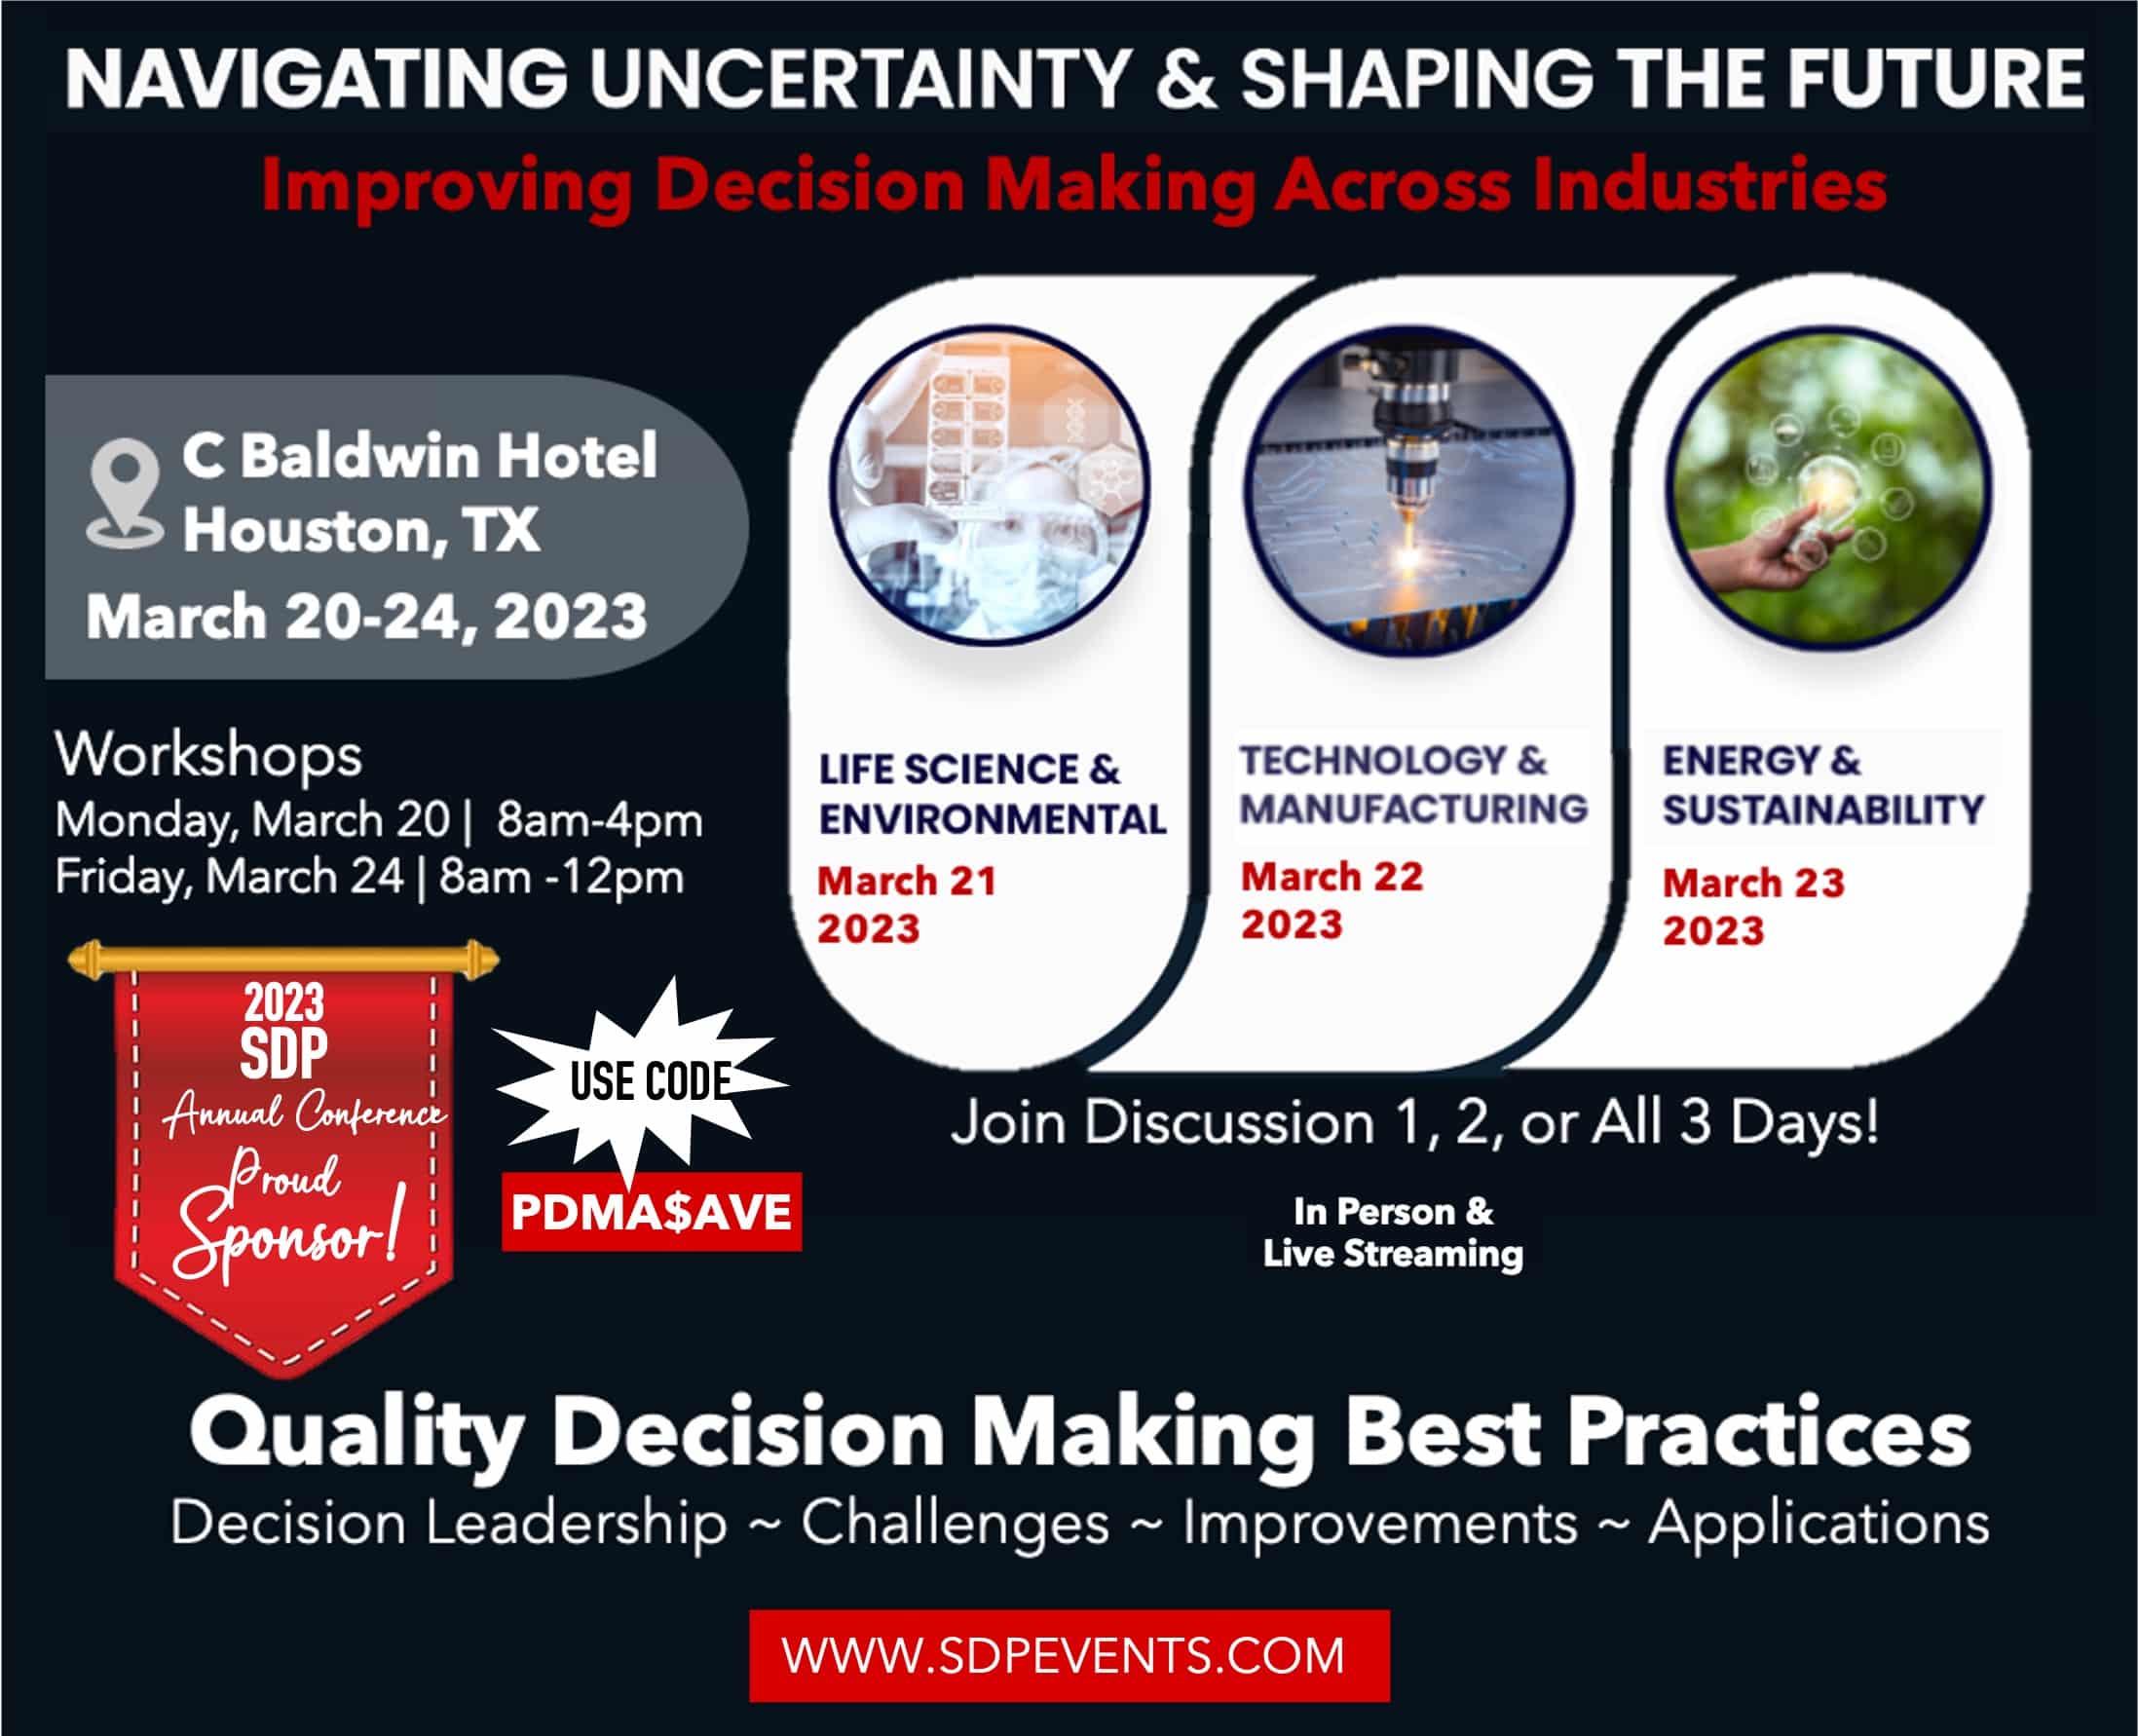 SDP Free webinar, Decision Leadership: The Head and Heart of Decision Making Wed., Jan 18th